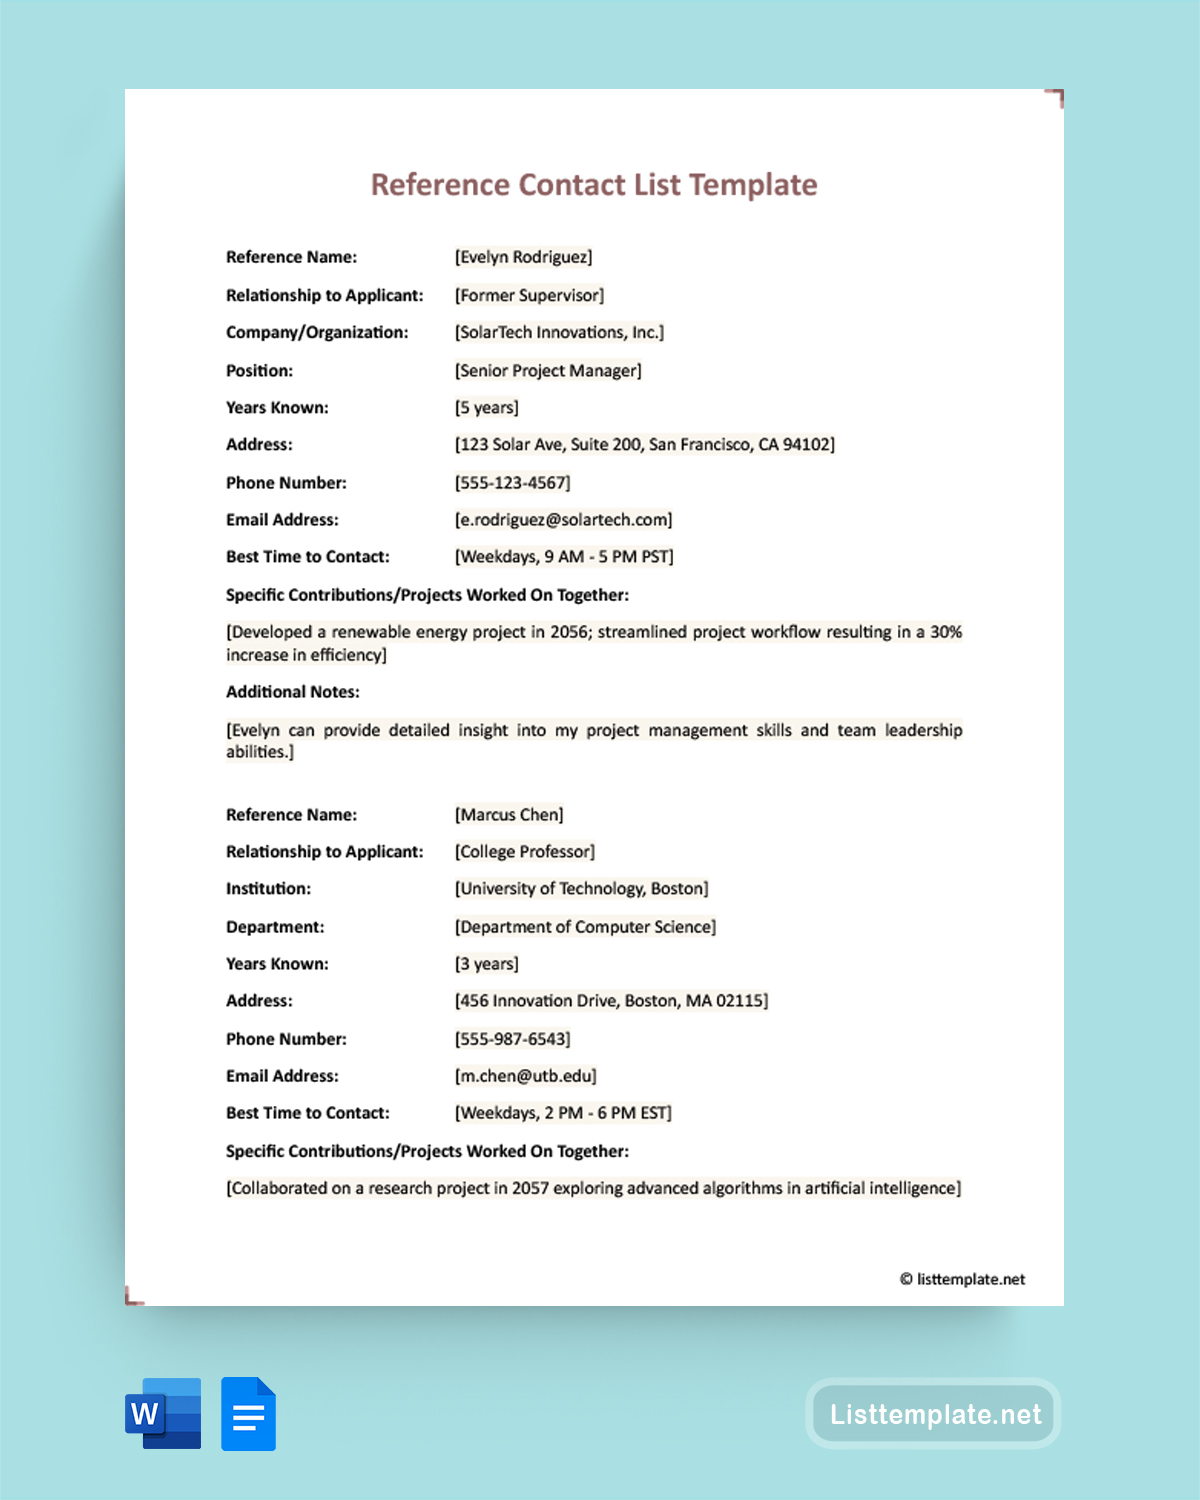 Reference Contact List Template - Word, Google Docs